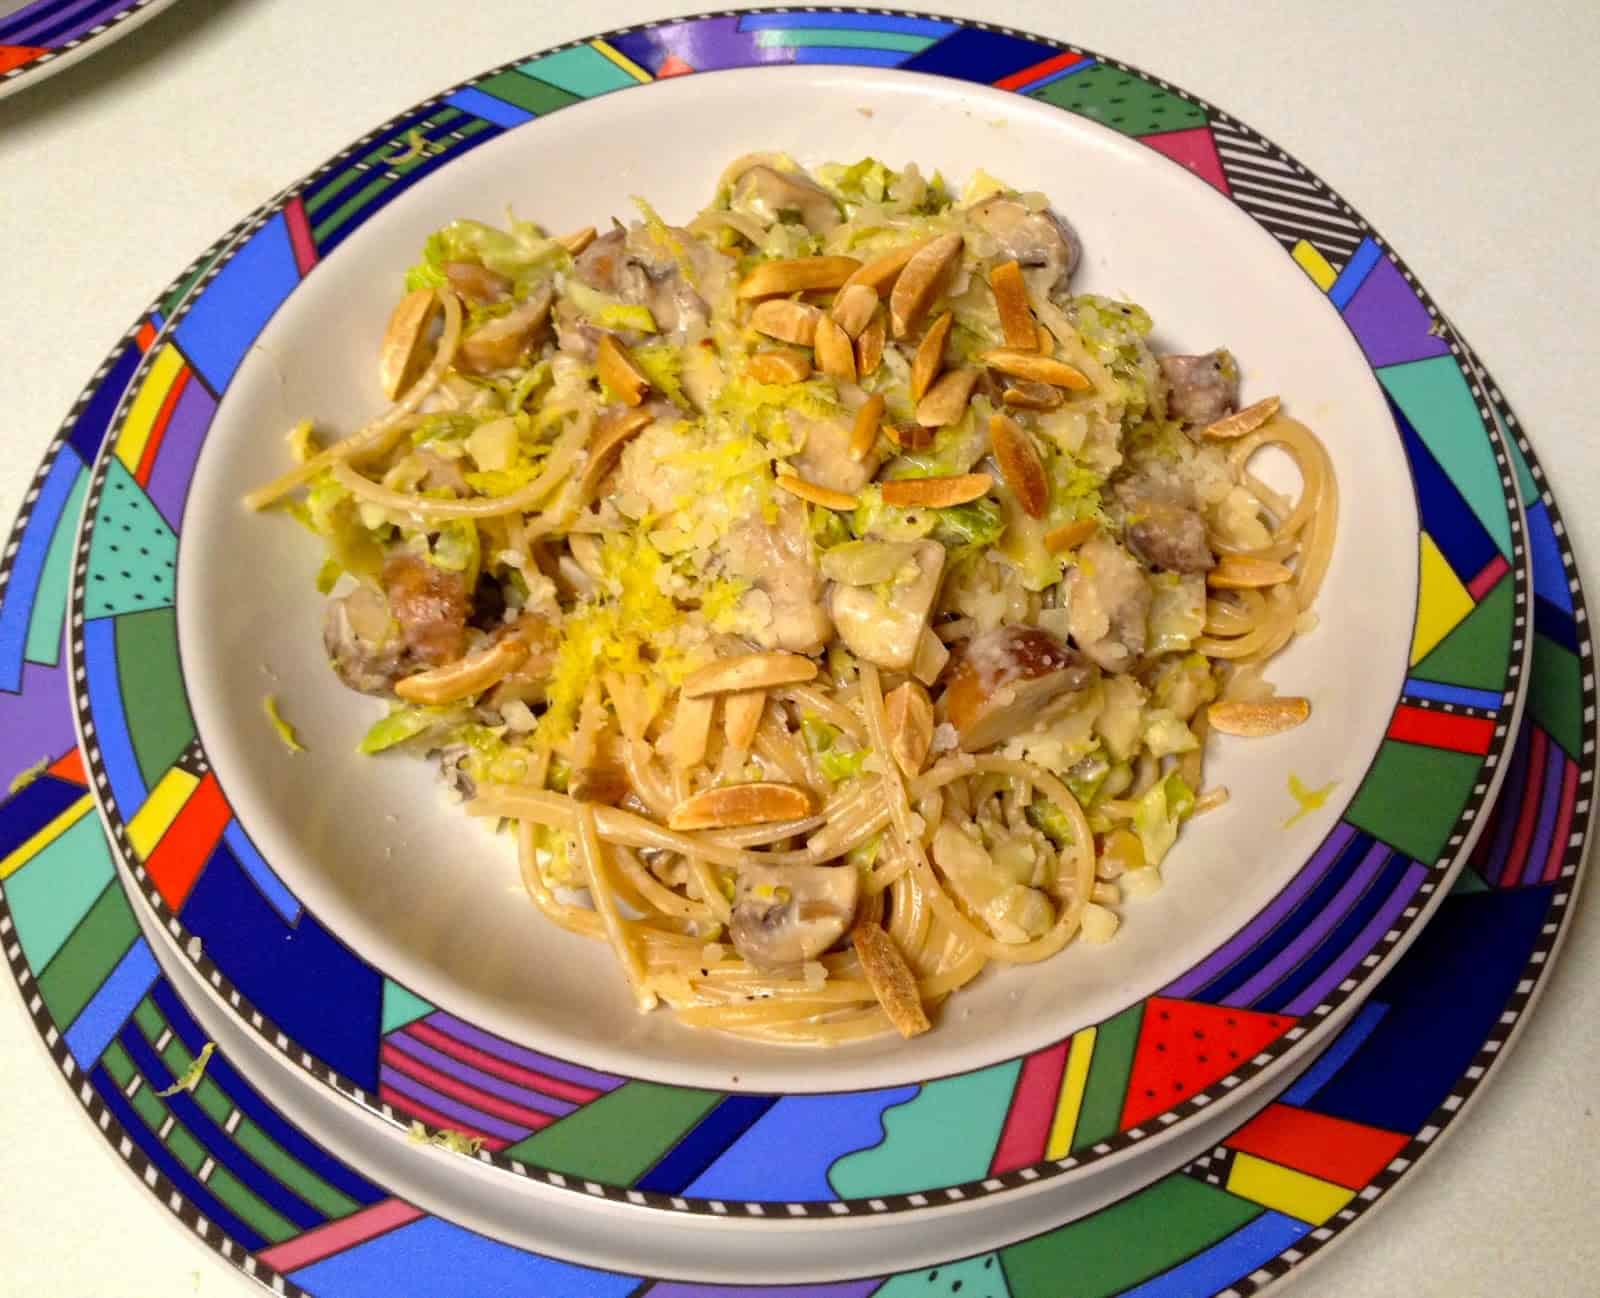 Whole Grain Spaghetti with Brussels Sprouts and Mushrooms from Giada de Laurentiis